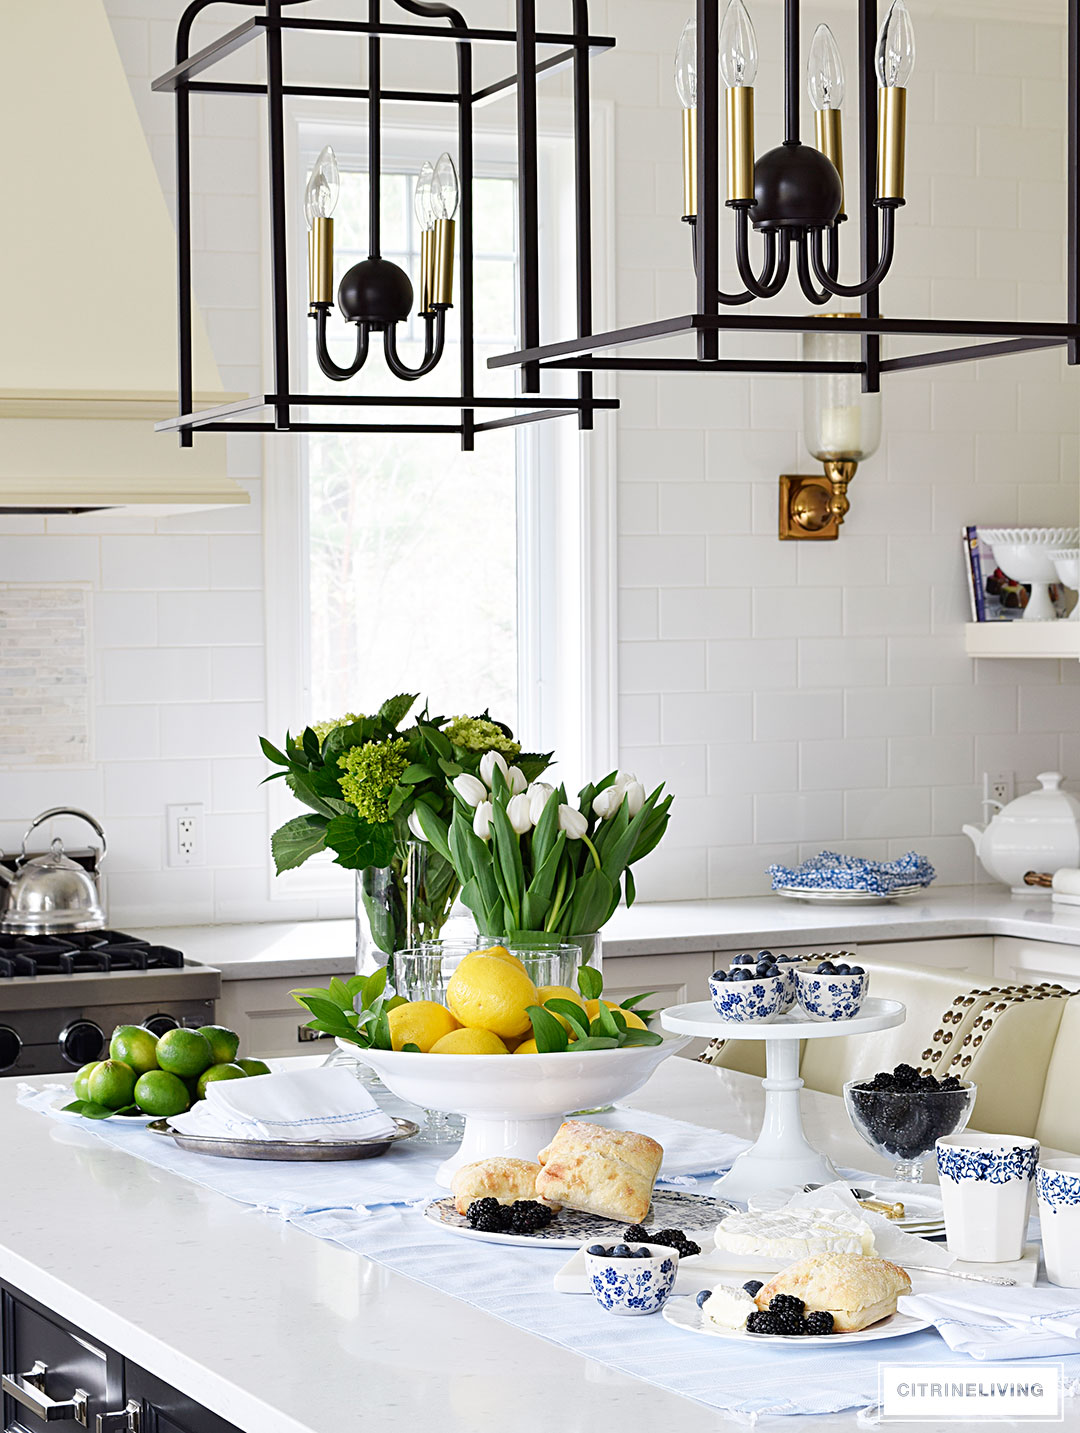 A white kitchen with a welcoming tablescape of blue and white accented with fresh flowers, lemons and limes.